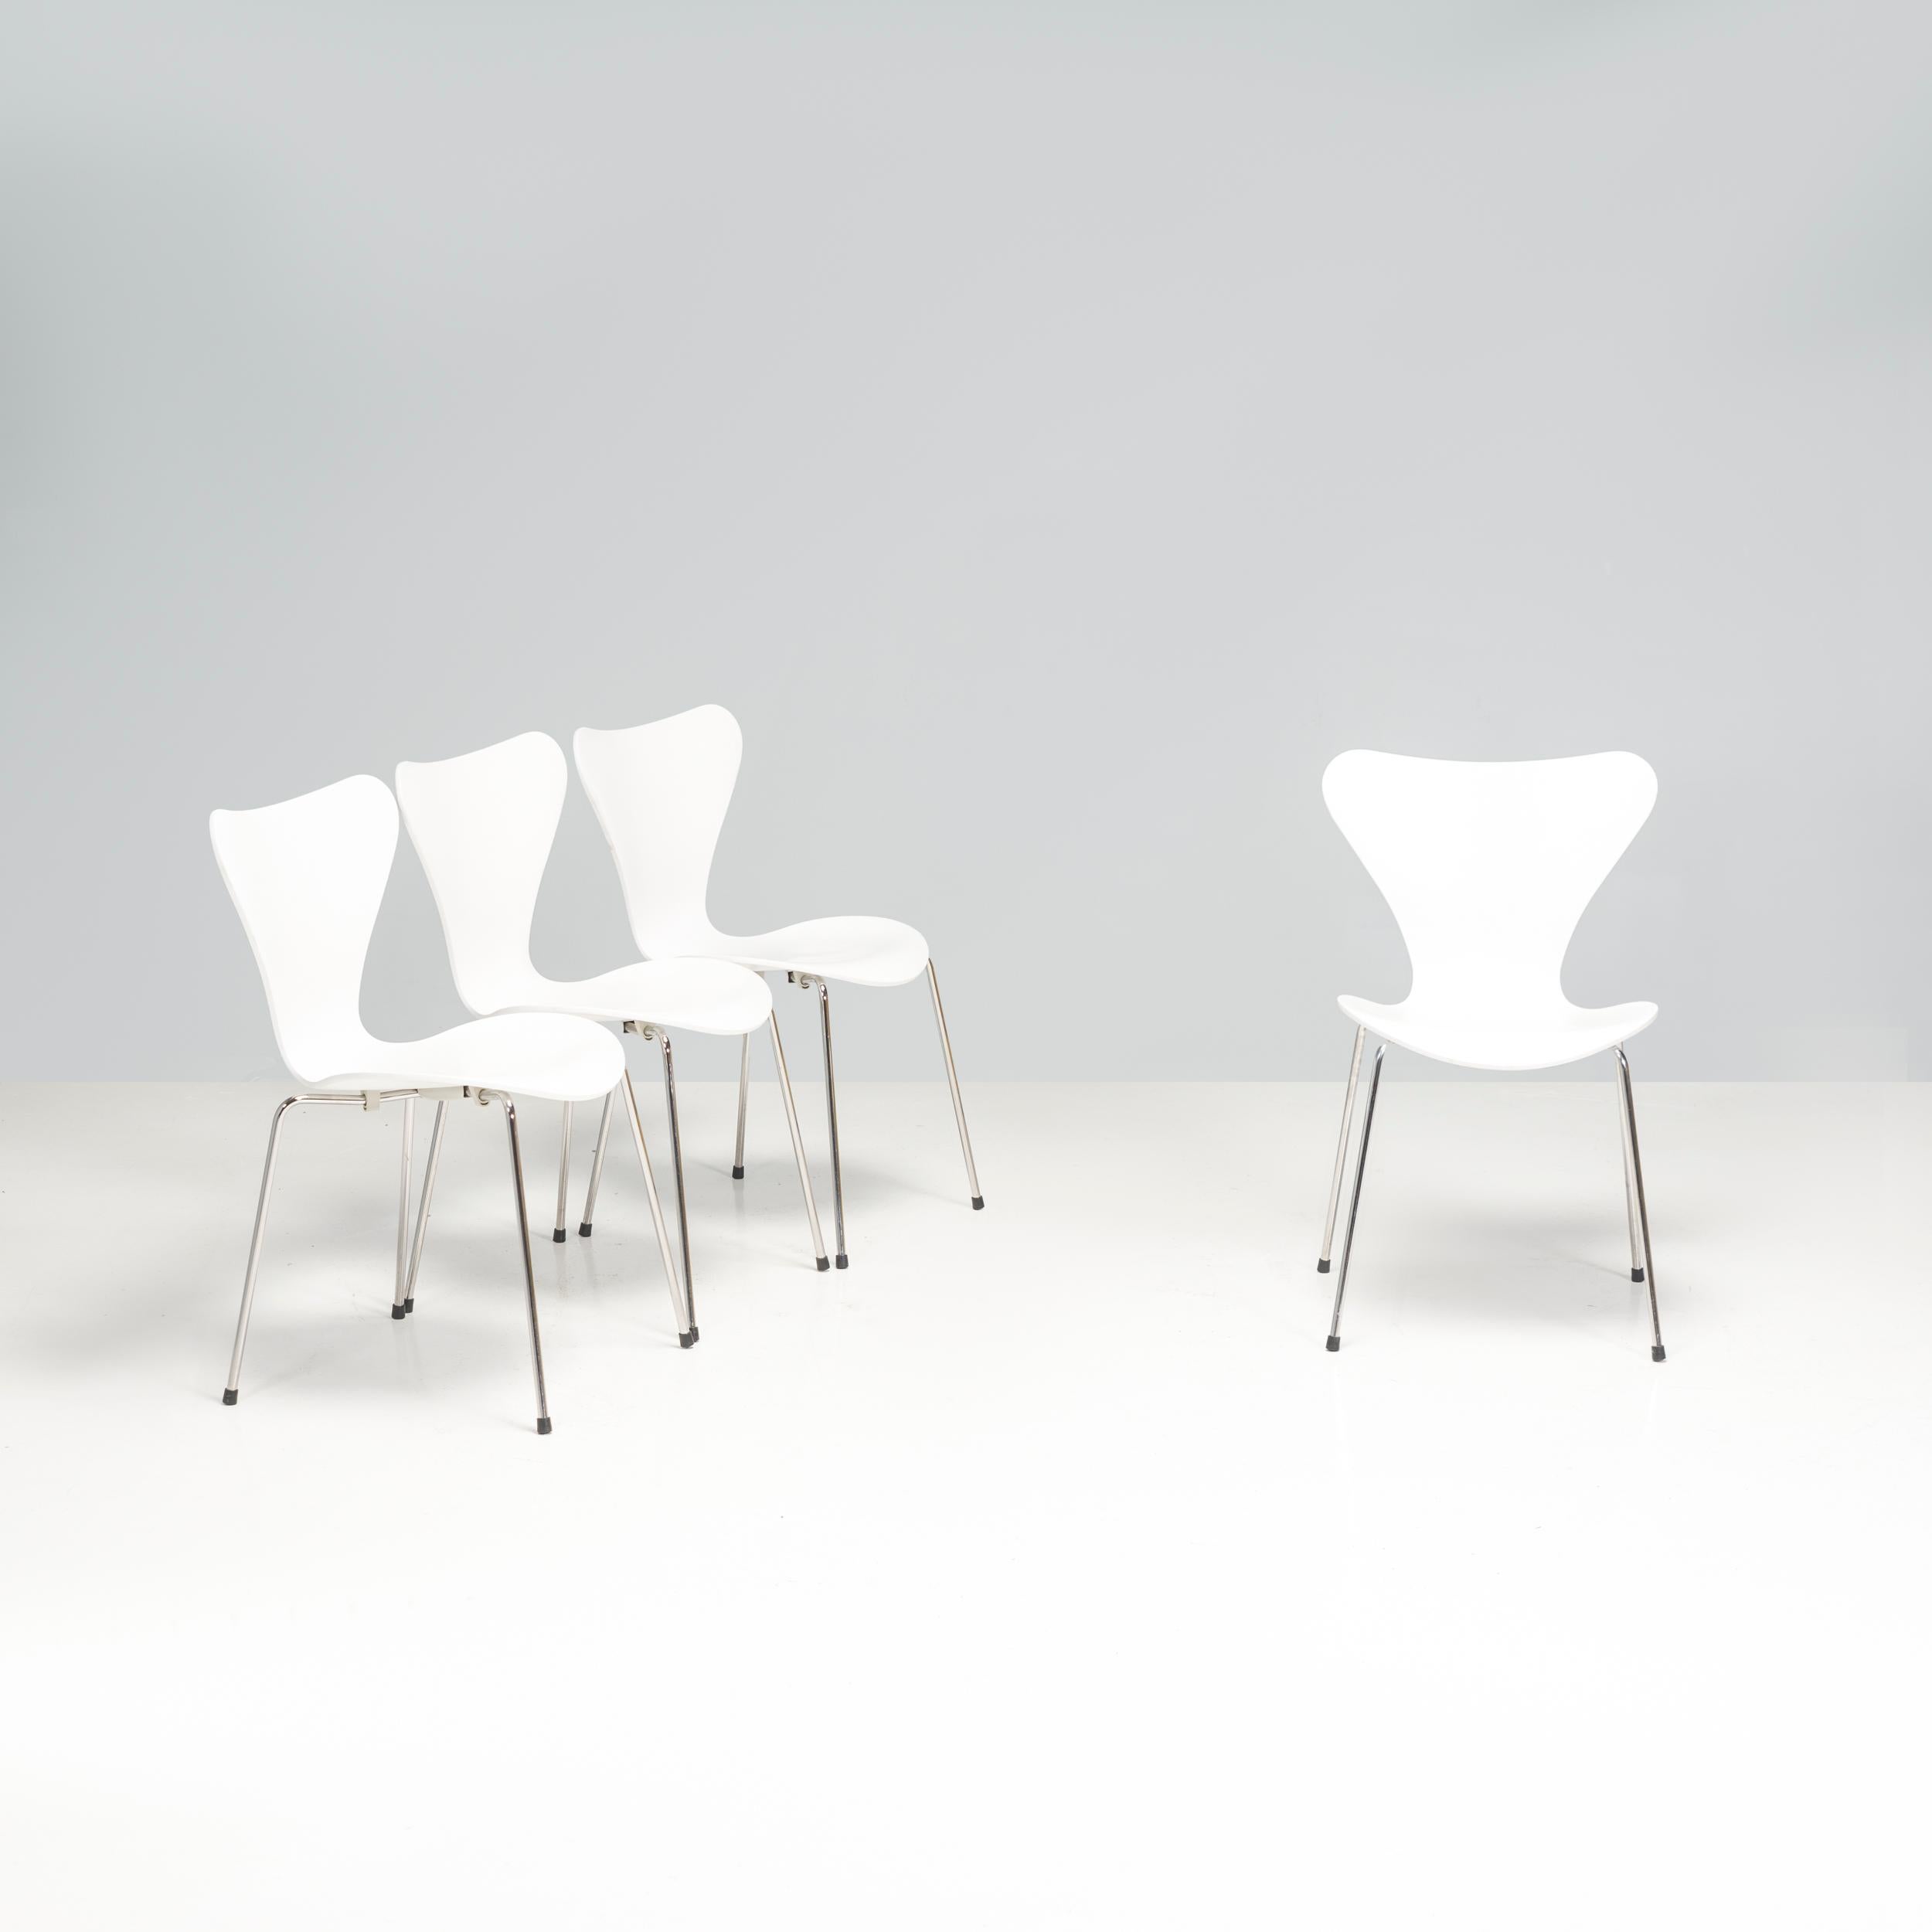 Originally designed by Arne Jacobsen in 1955 for the H55 exhibition in Sweden, the Series 7 Dining chair has been made by Fritz Hansen ever since. 

Originally designed by Arne Jacobsen in 1955 for the H55 exhibition in Sweden, the Series 7 Dining